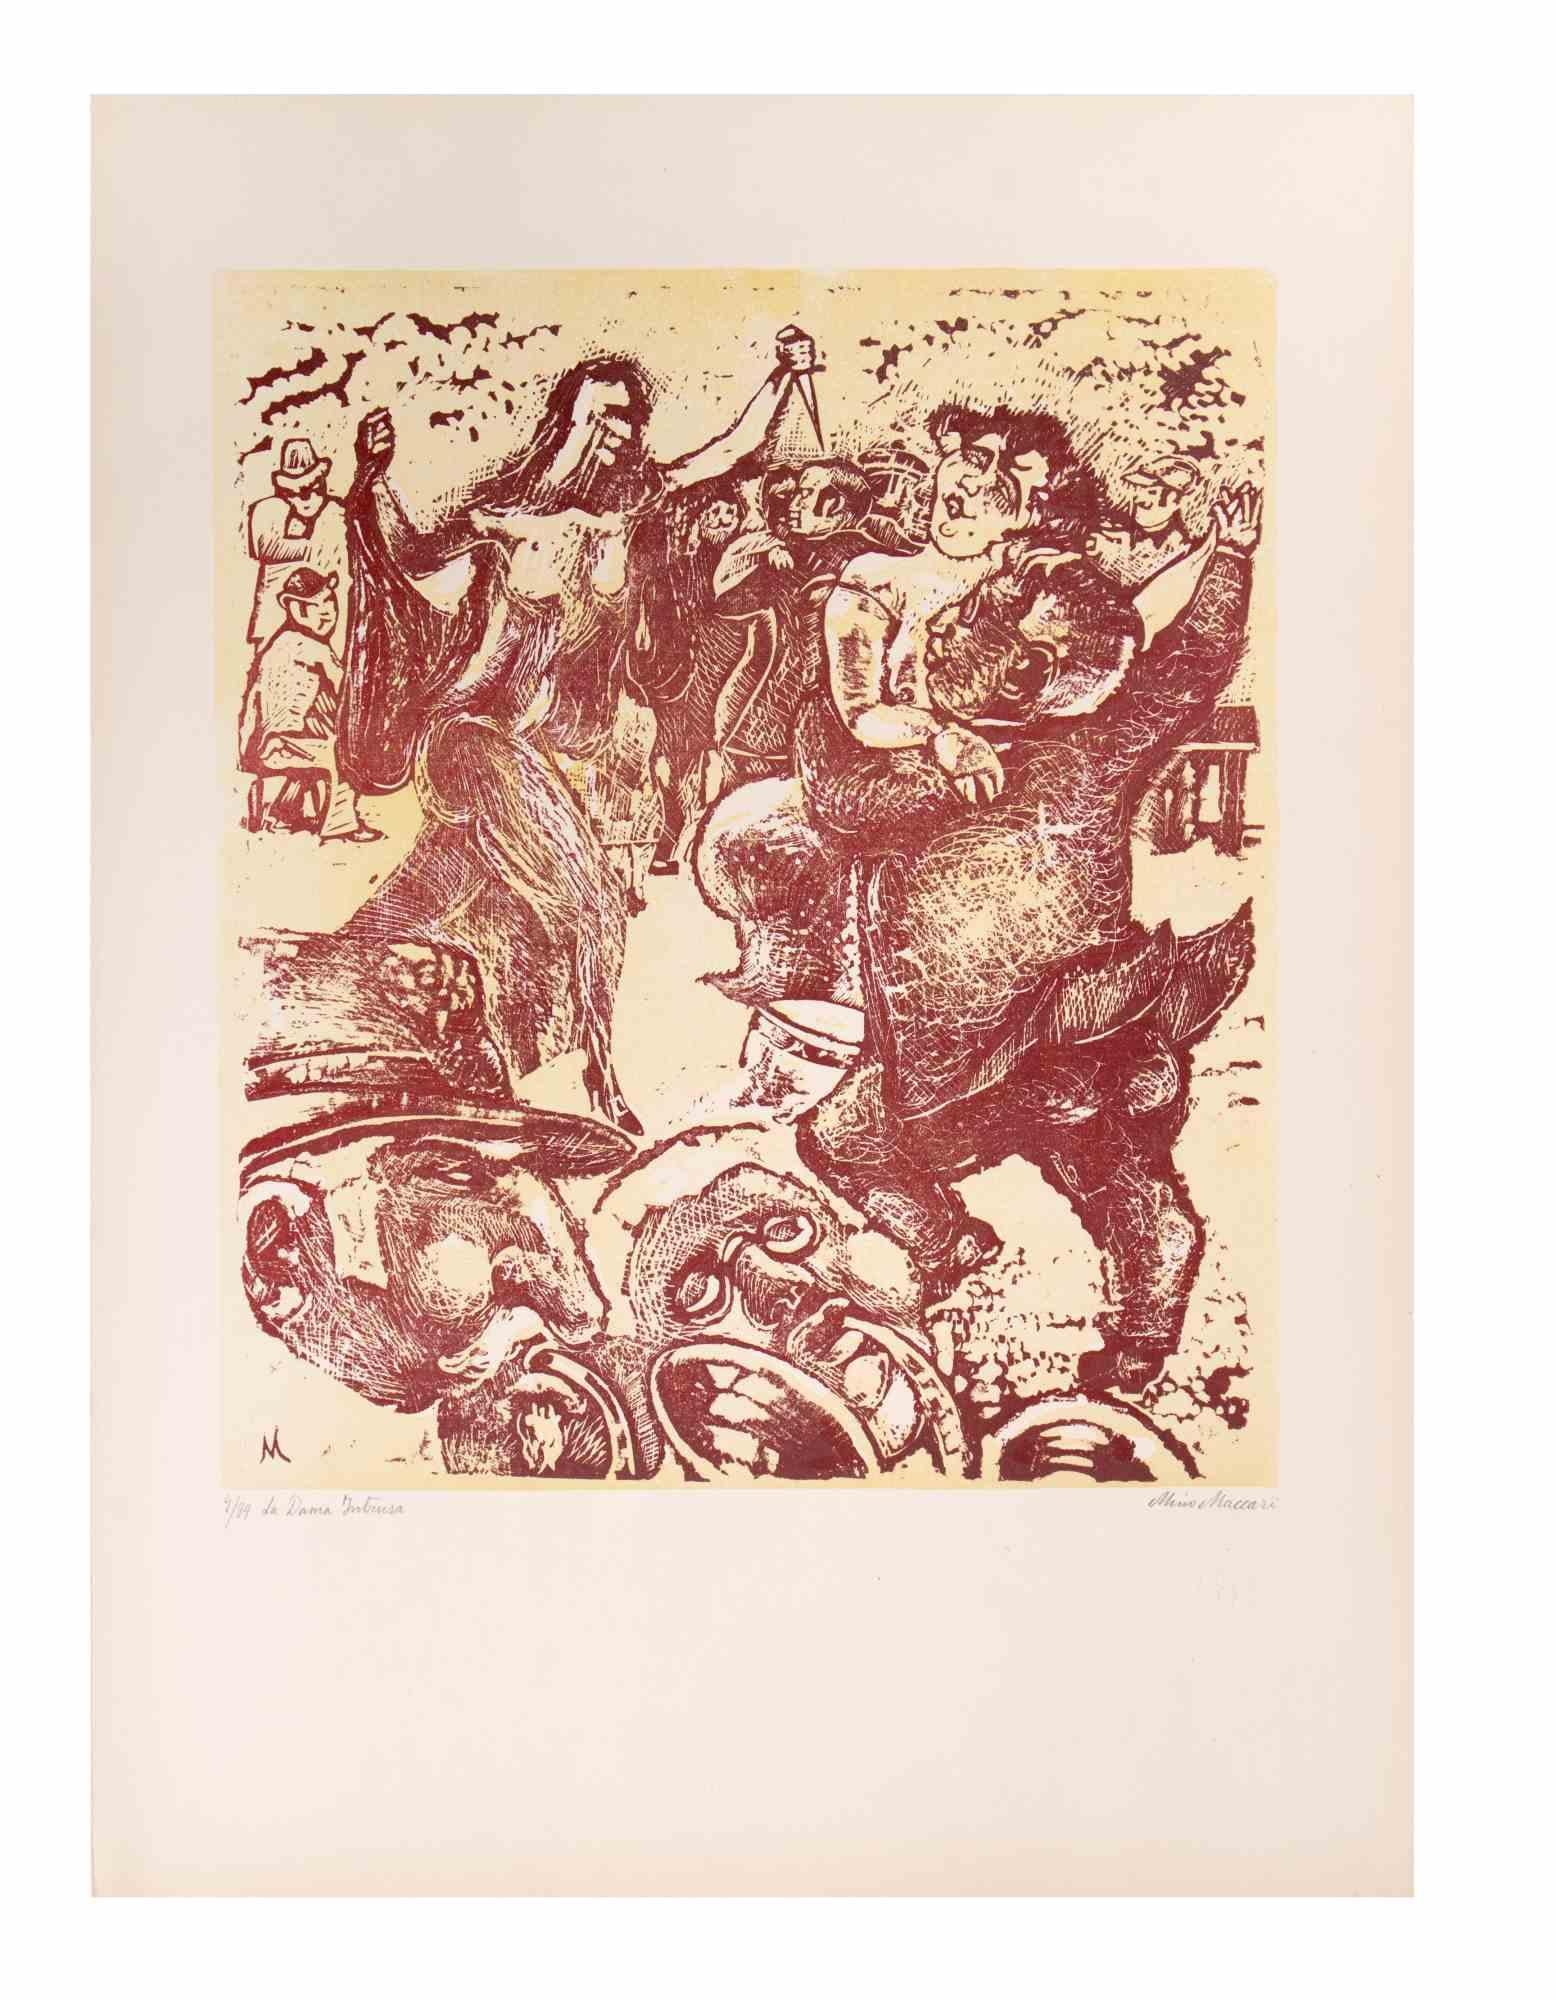 The Intruder Lady is an Artwork realized by Mino Maccari  (1924-1989) in the Mid-20th Century.

Colored woodcut on paper. Hand-signed on the lower, numbered 4/89 specimens and titled on the left margin.

Good conditions.

Mino Maccari (Siena,